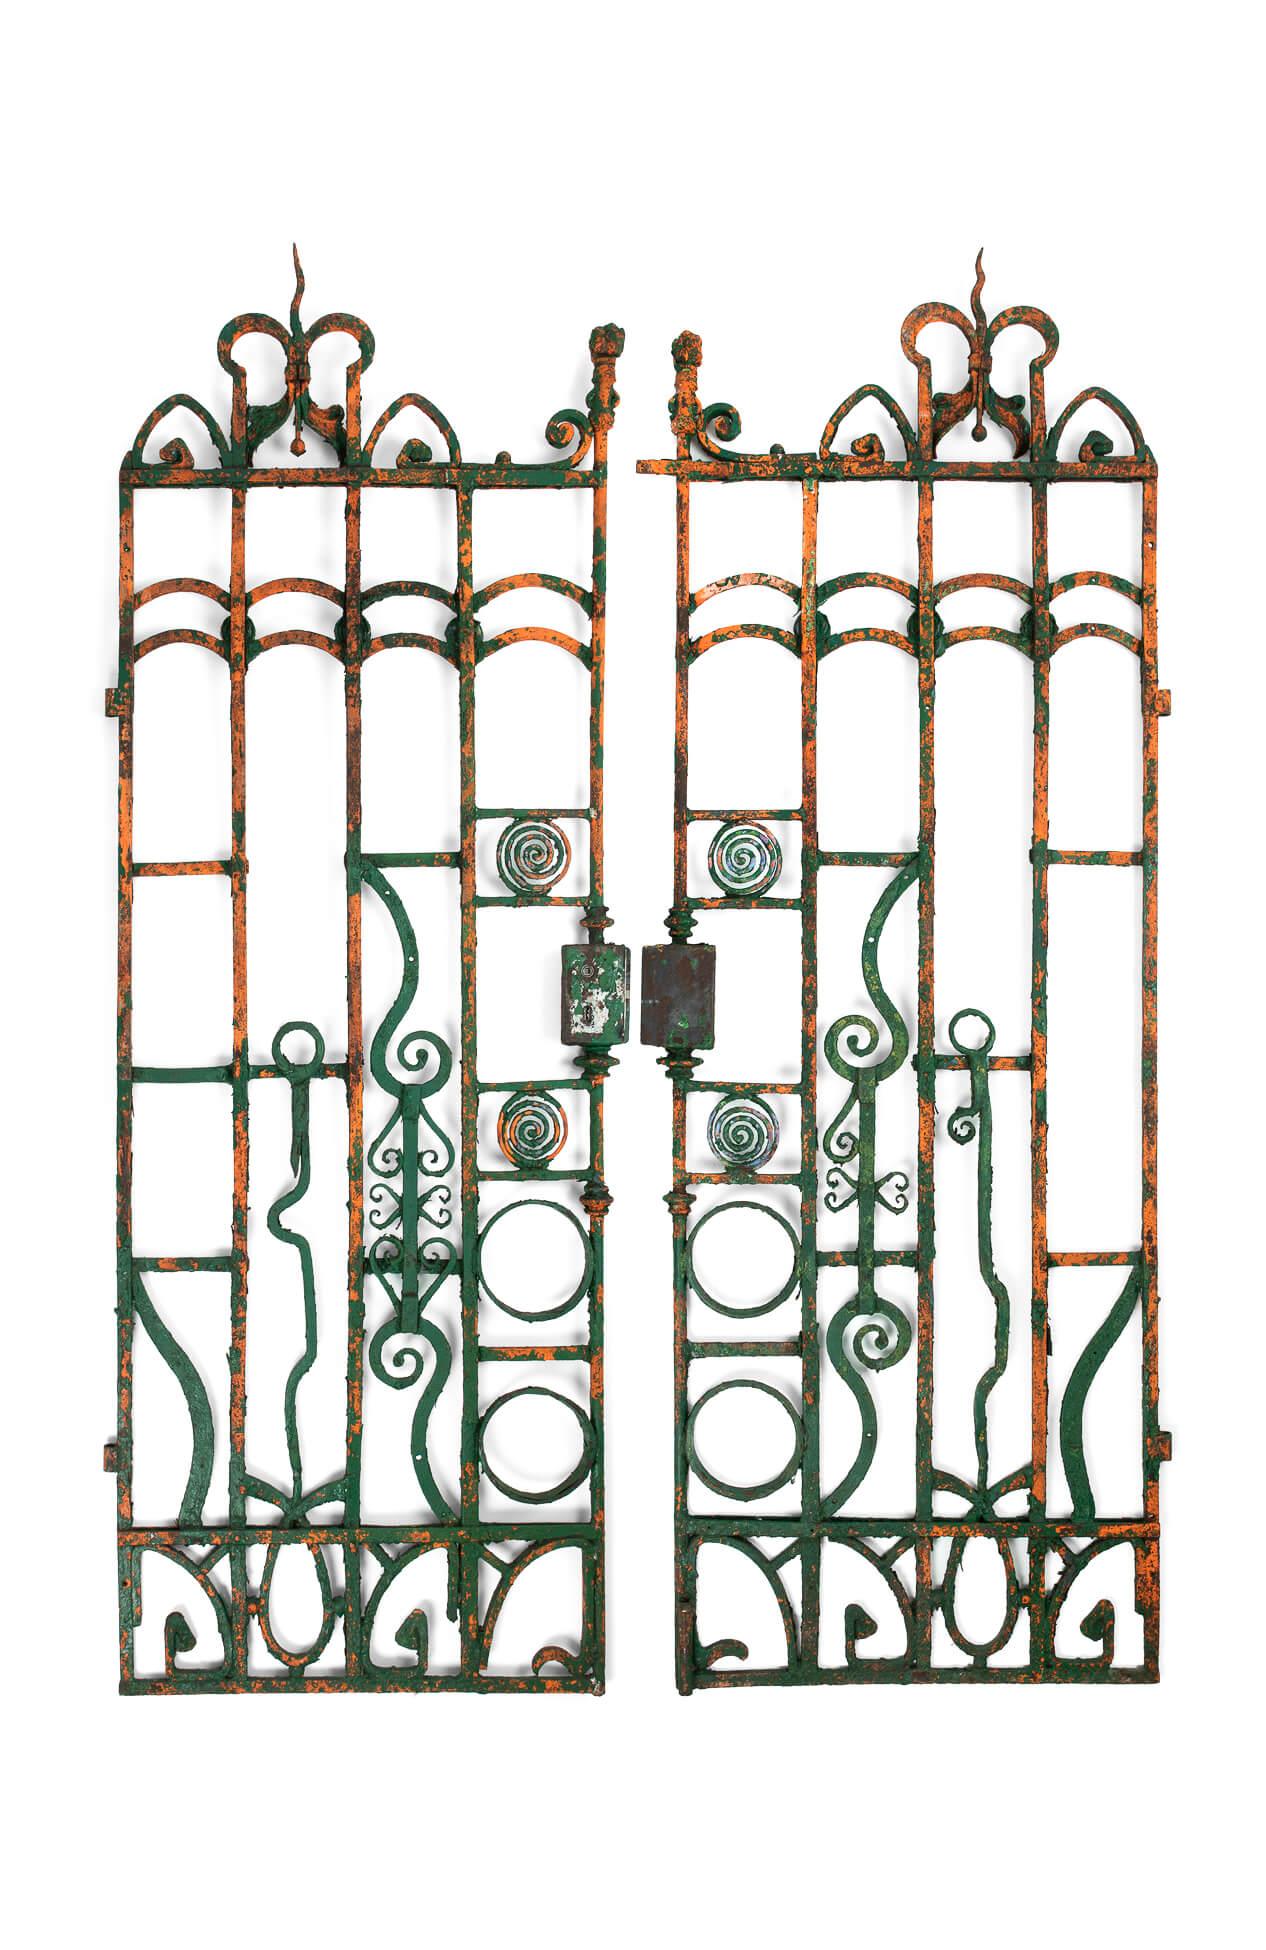 A superb pair of wrought iron entrance gates in original flaky paint. With scroll design features and twisting railheads leading to balustrade and concentric circle rosettes. Blacksmith forged in wrought iron with lock and hinge brackets present.